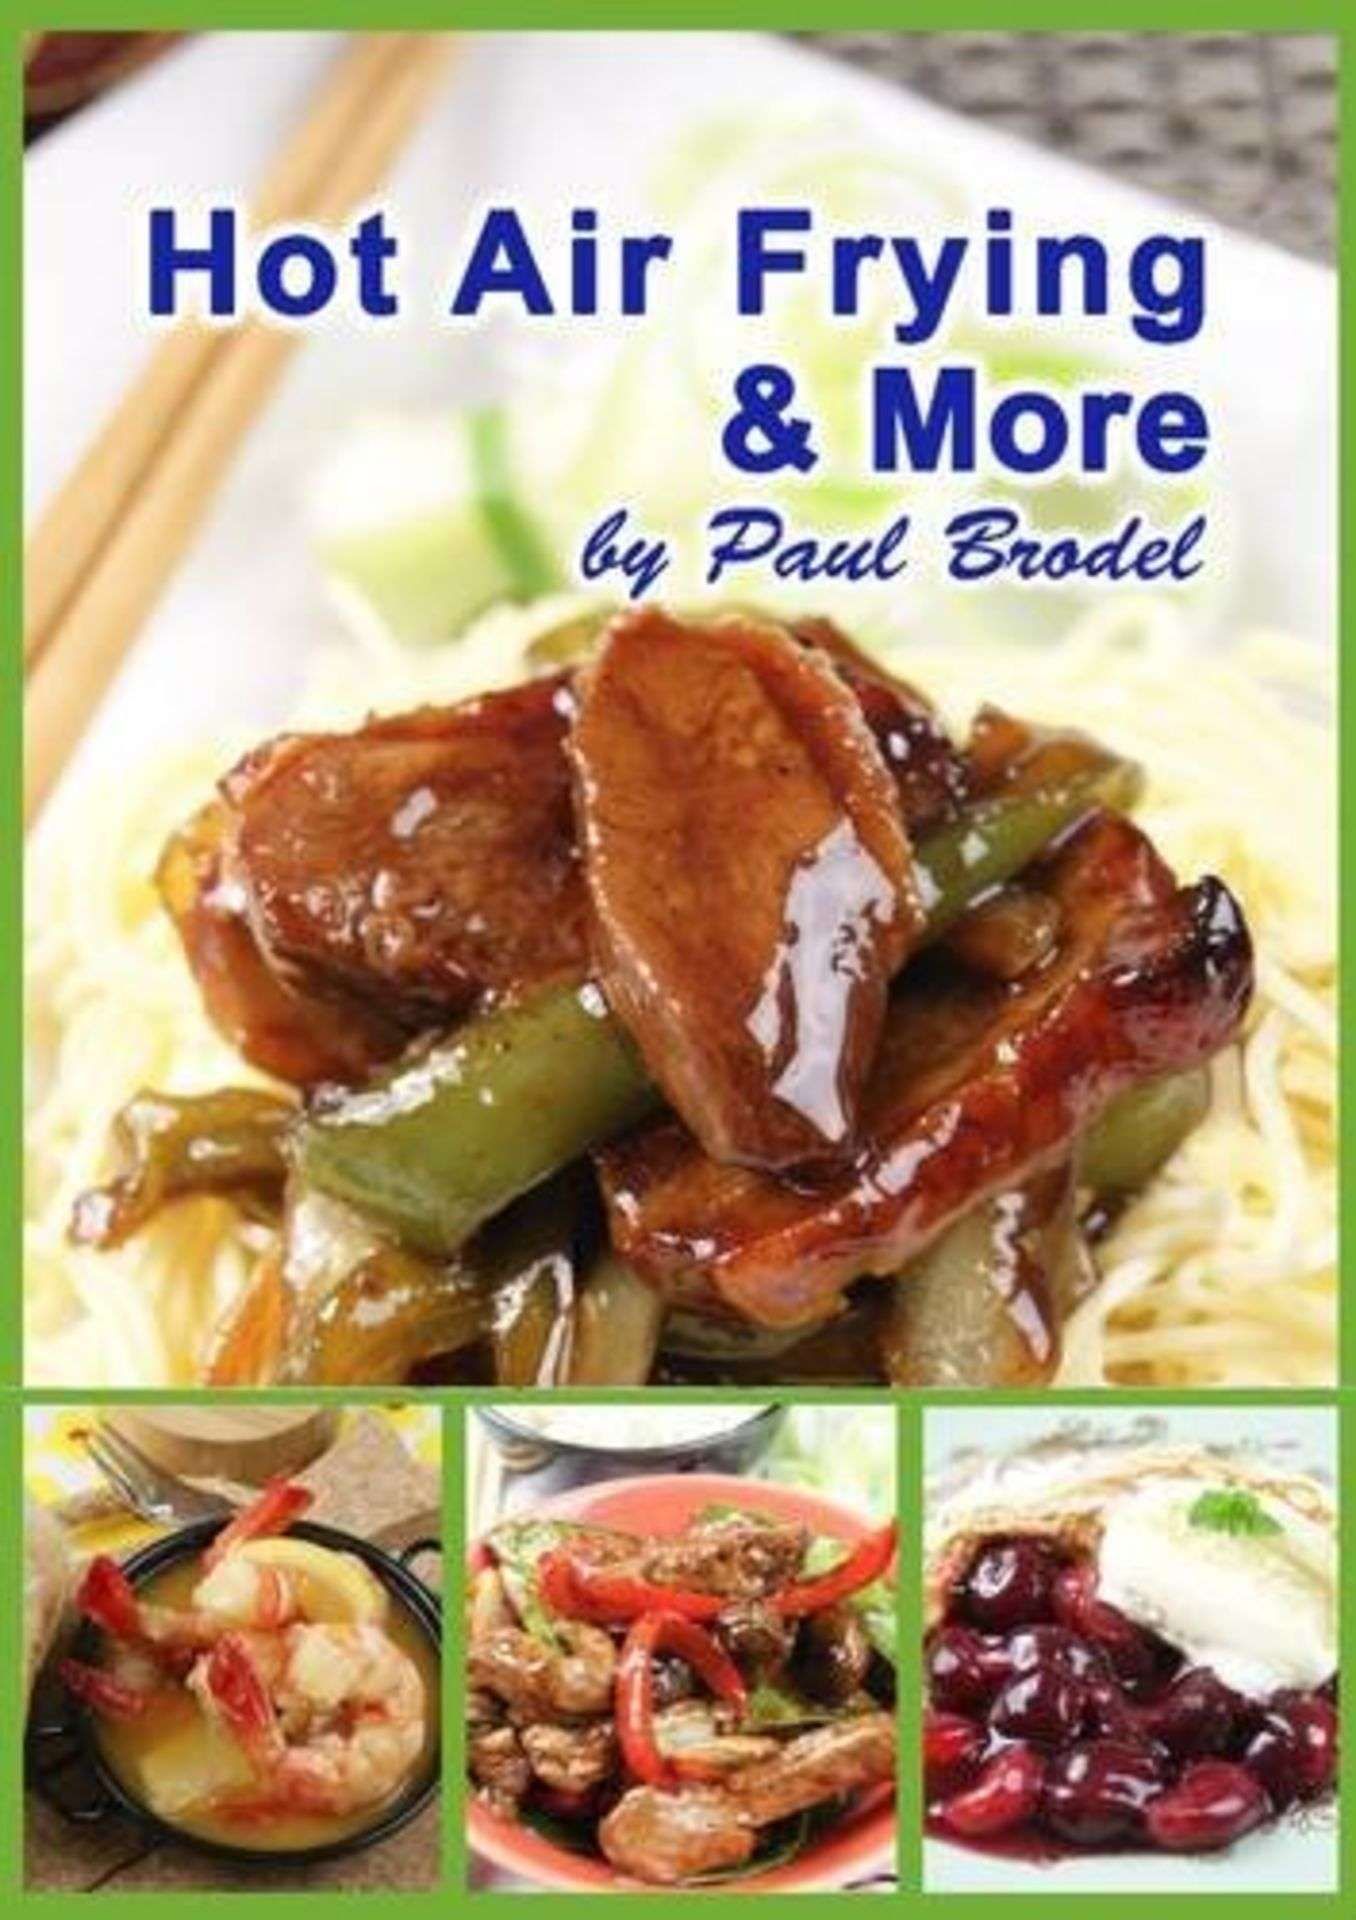 100 X BRAND NEW HOT AIR FRYING AND MORE BY PAUL BRODEL BOOKS R19.2